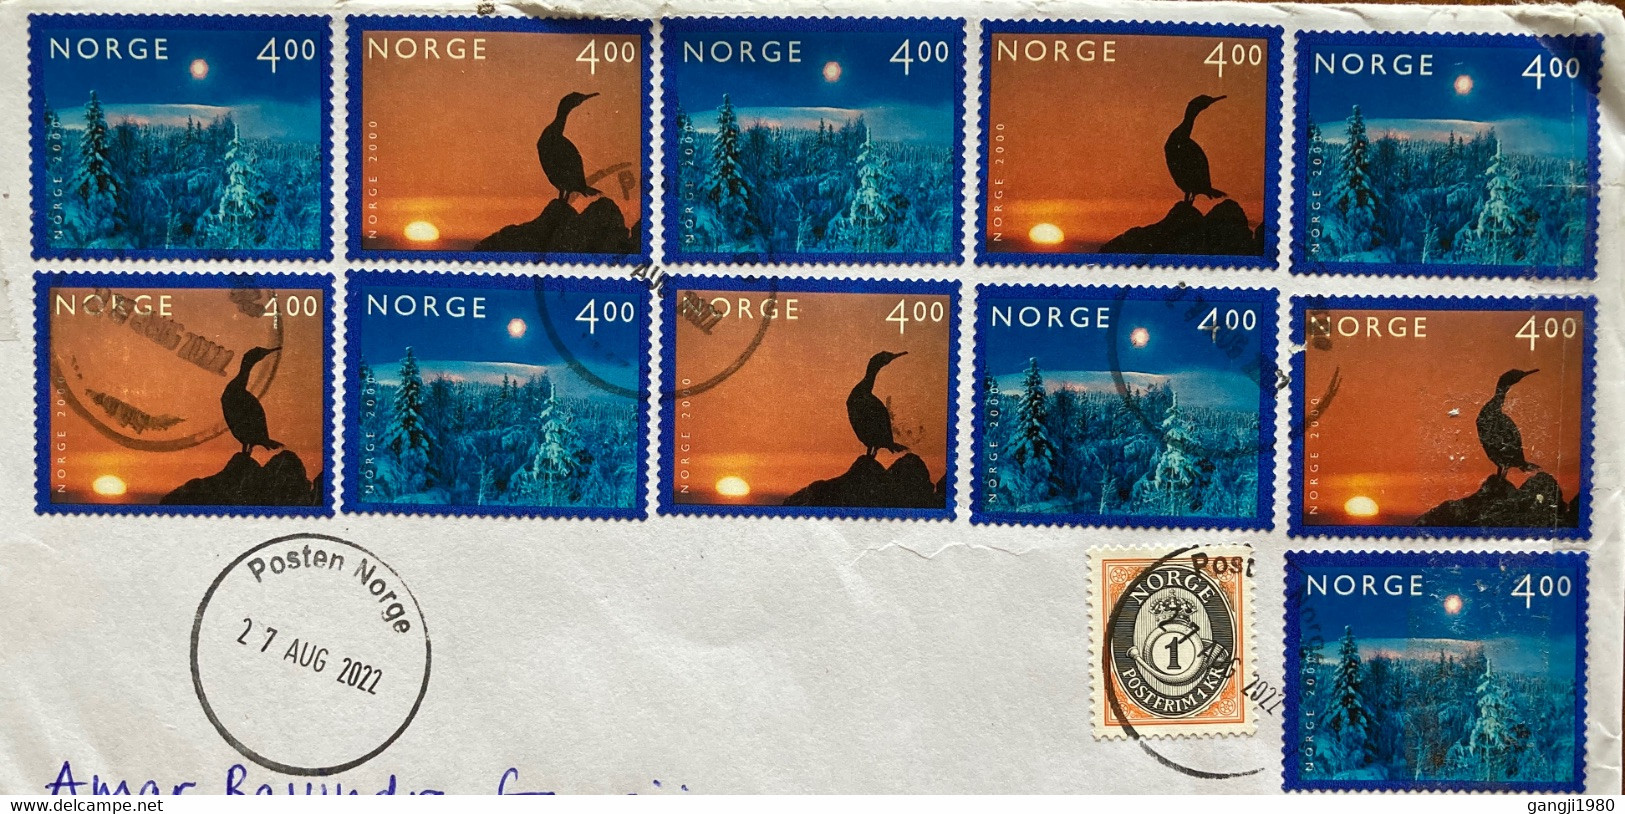 NORWAY,2022,USED COVER 1 SELF ADHESIVE YEAR 2000 MILLENNIUM STAMPS 11 AIRMAIL VIGNETTE,POSTEN NORGE CANCEL TO IN - Lettres & Documents